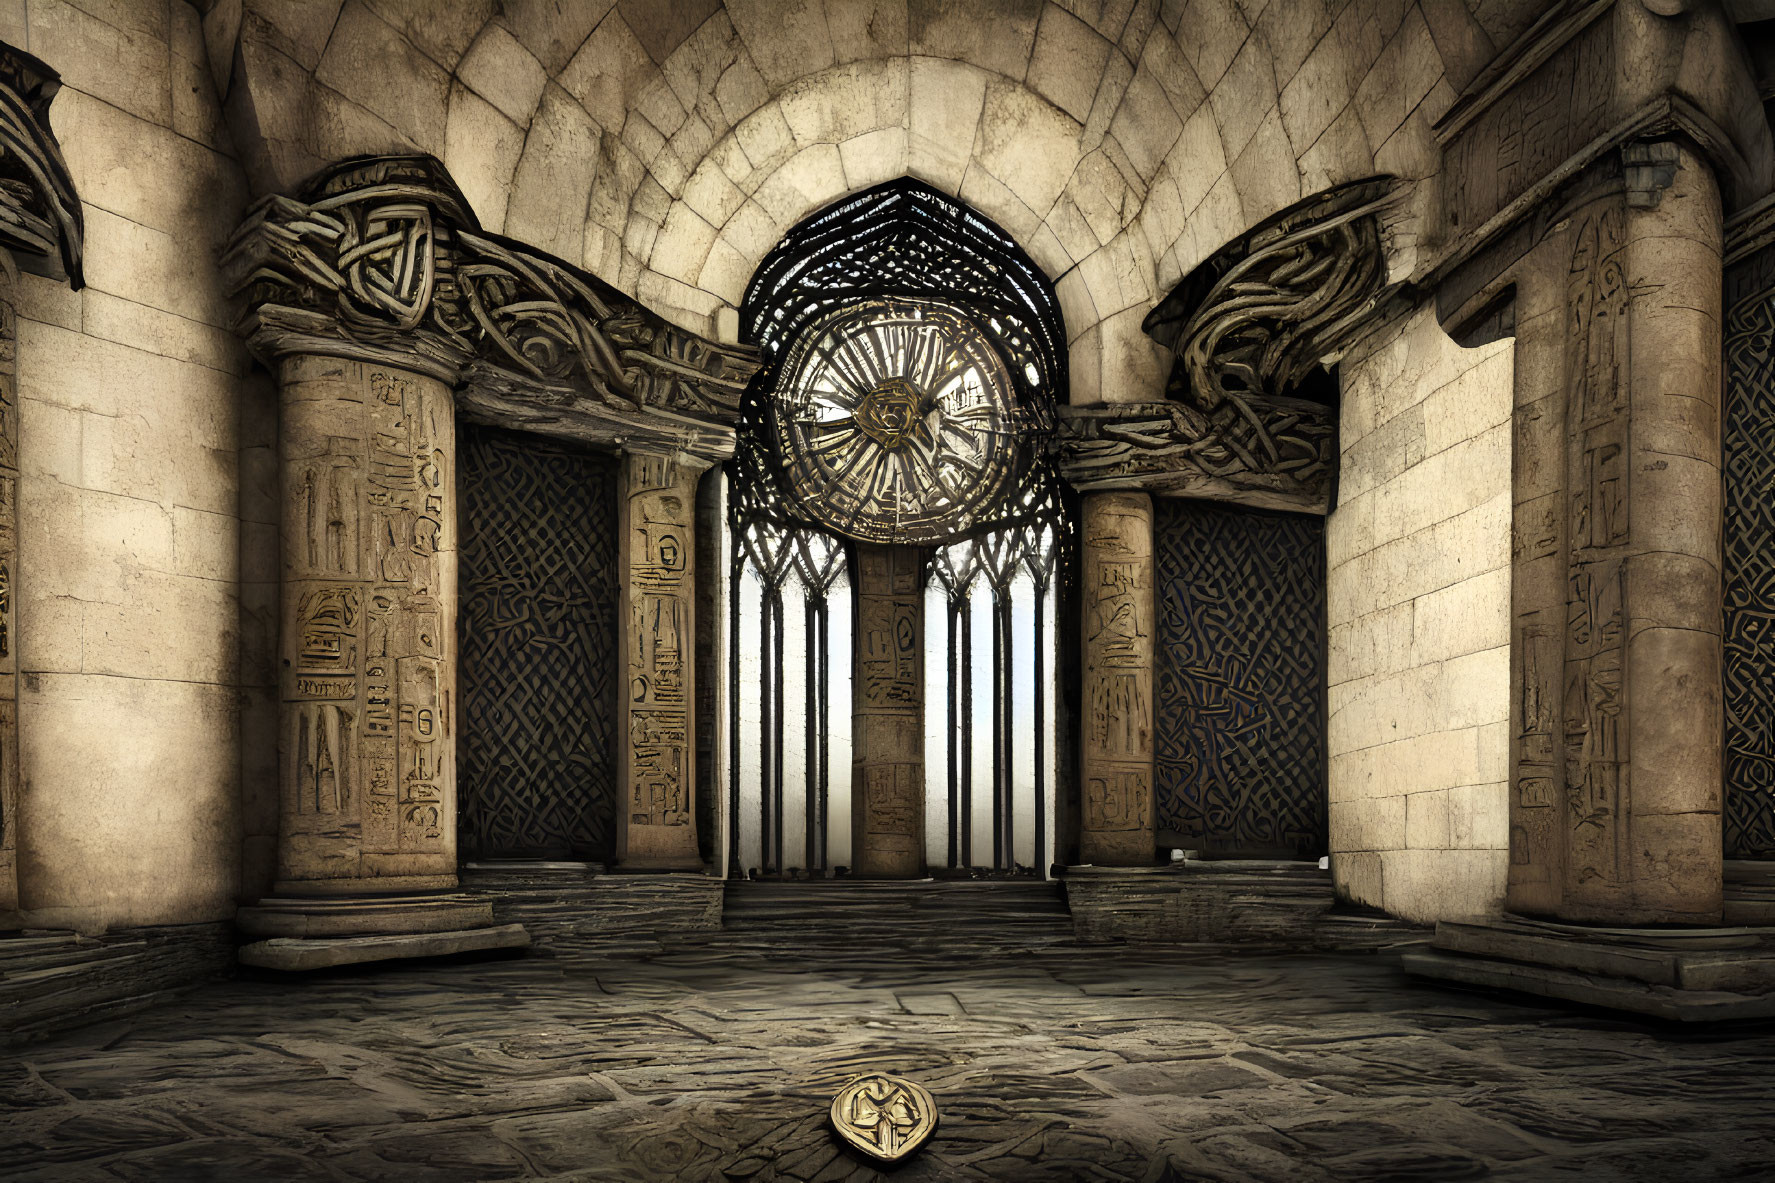 Spacious ornate hall with intricate patterns, circular window, and mysterious emblem